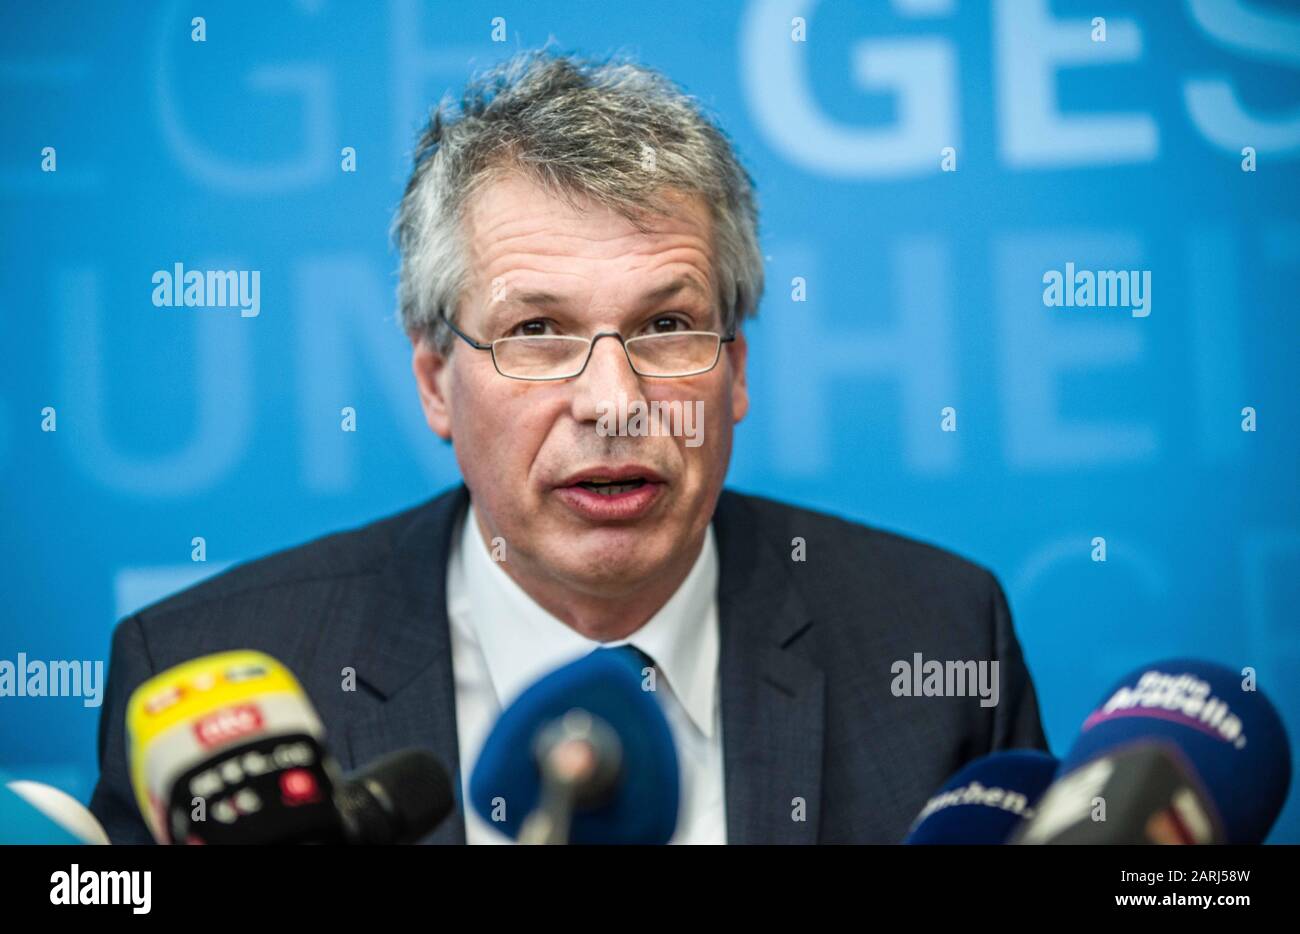 Munich, Bavaria, Germany. 28th Jan, 2020. DR. ANDREAS ZAPF, President of the Bayerisches Landesamt fuer Gesundheit und Lebensmittelsicherheit (Bavarian Office for Health and Food Safety, LGL). In connection with the first confirmed case of Corona Virus in Germany, the Bavarian Health Ministry (Bayerisches Staatsministerium fuer Gesundheit und Pflege) held a press conference to discuss the findings. The virus was found in the wealthy Lake Starnberg area, just outside of western Munich, which is also connected to the citiy via its S-Bahn network. The affected is a 33 year old from Landsberg, Stock Photo